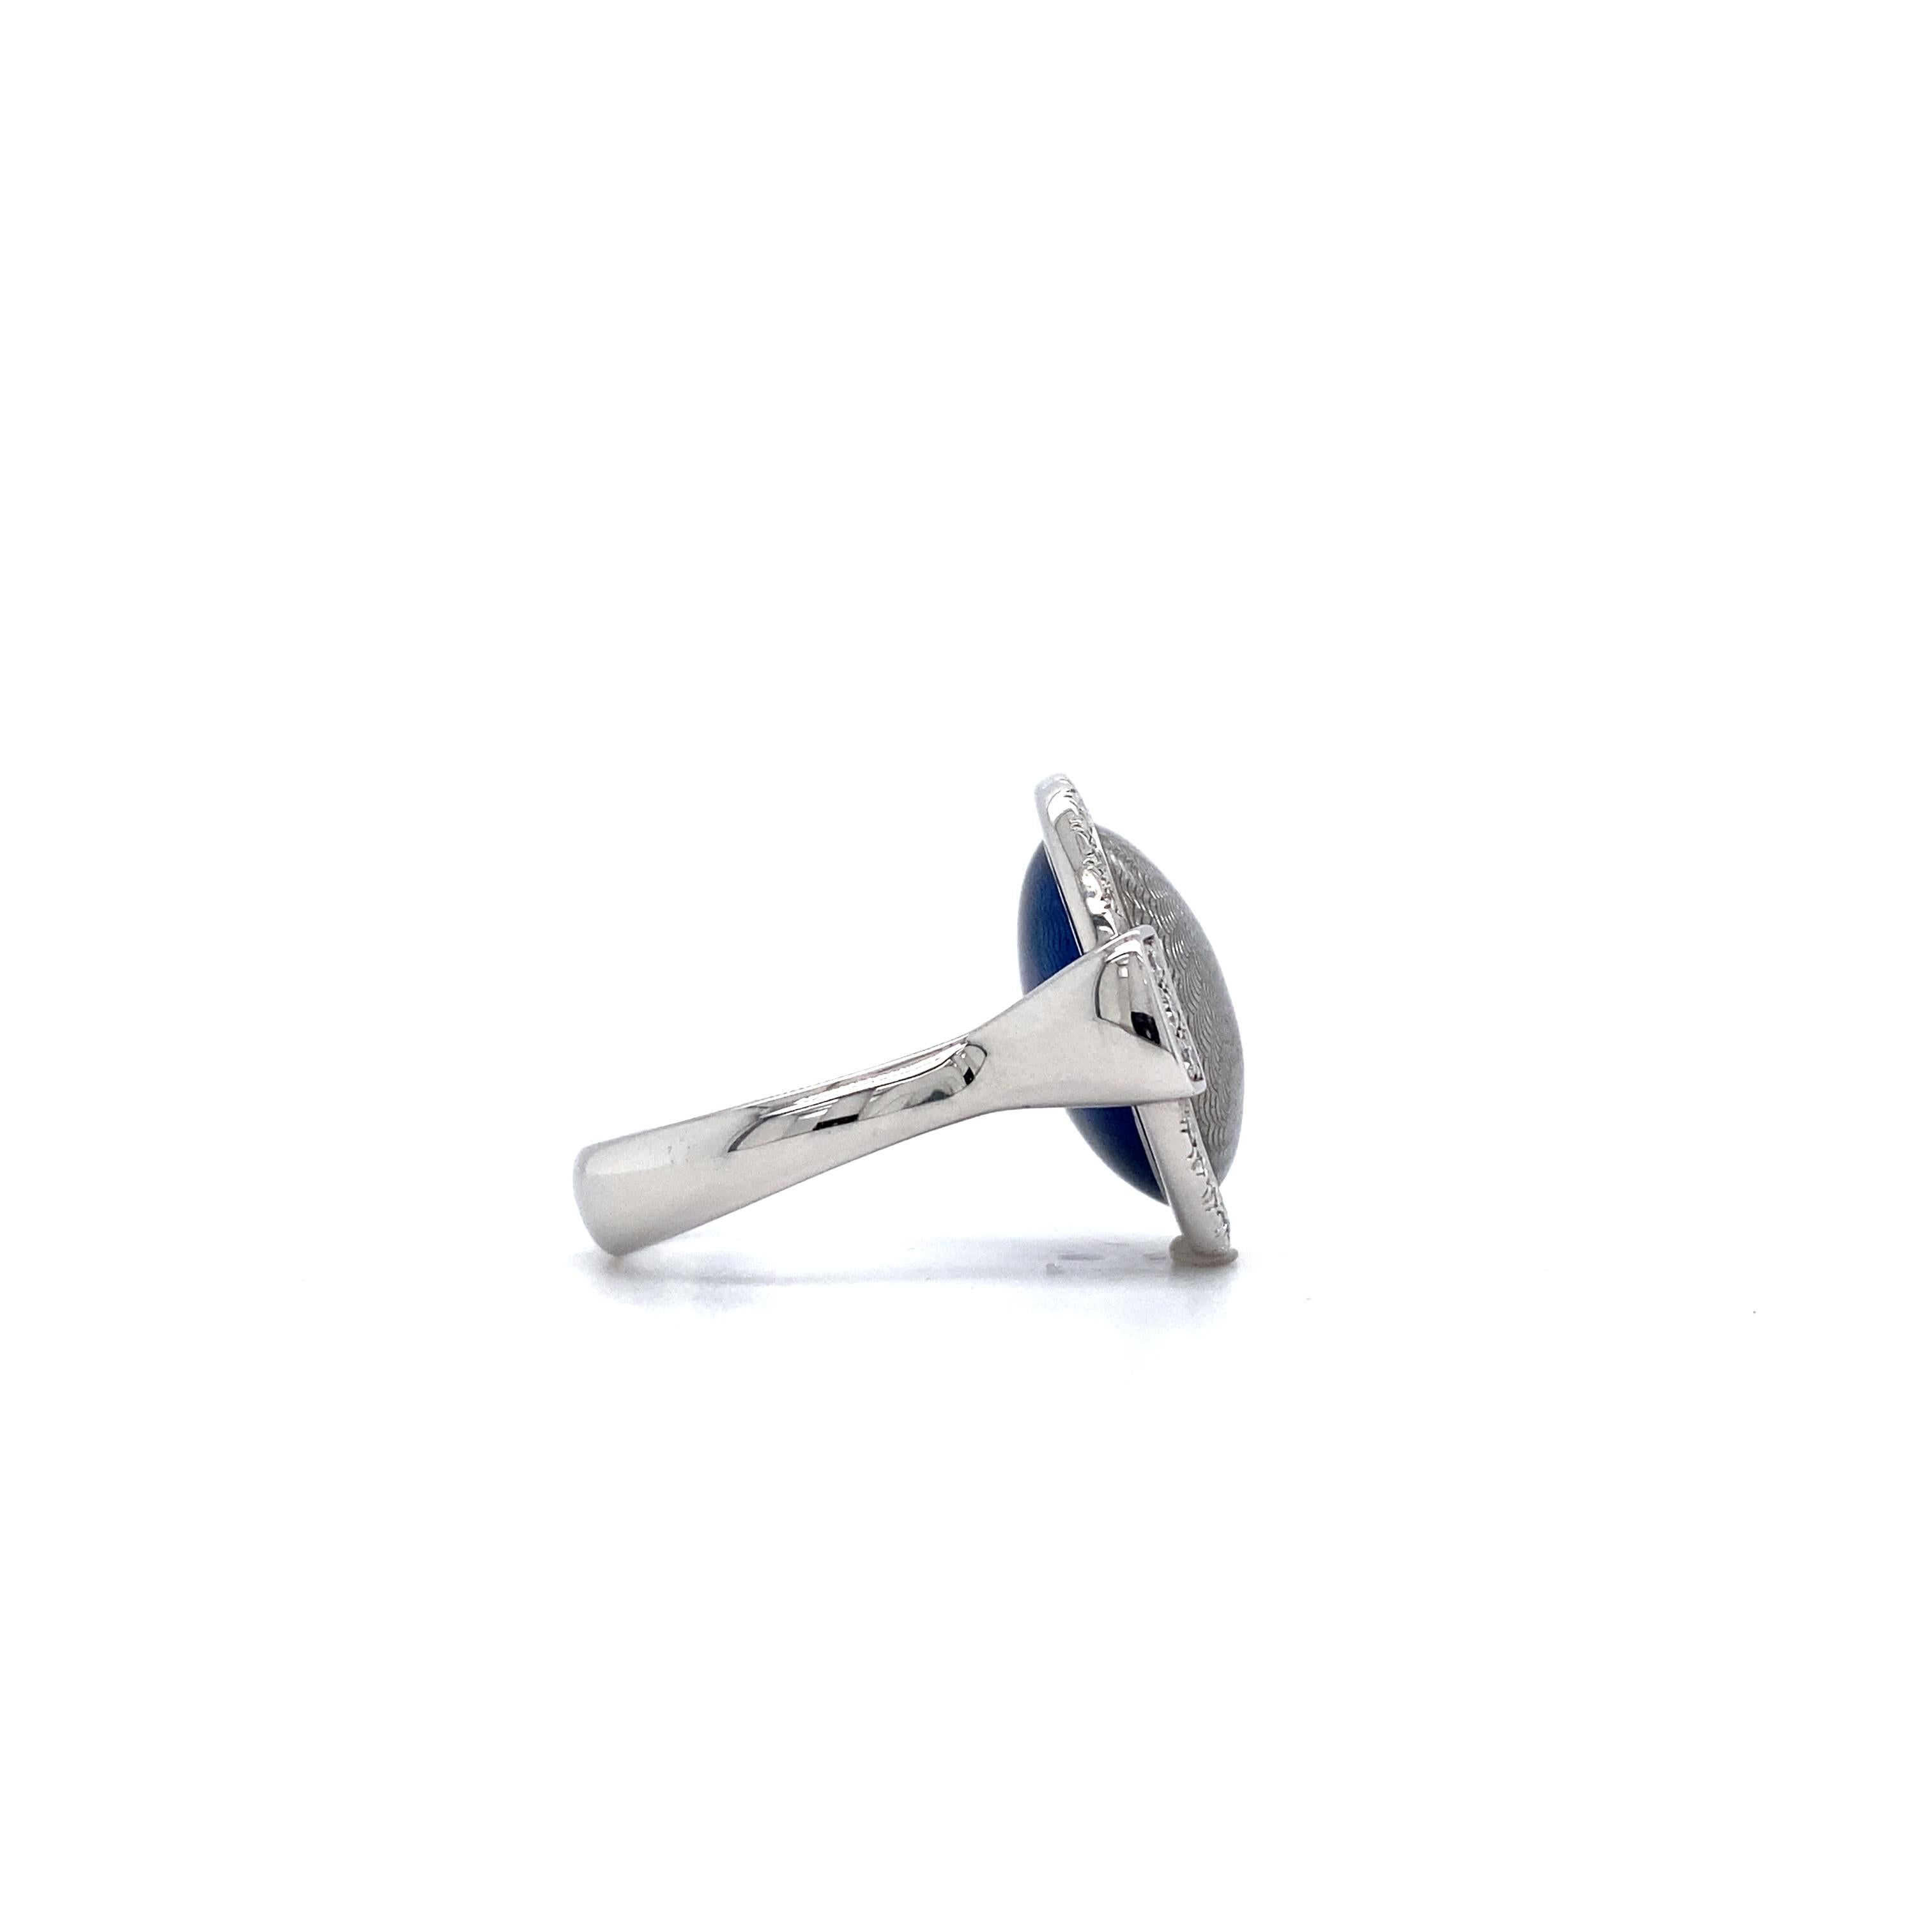 Victor Mayer Ring Candy Silver Blue Enamel 18k White Gold 78 Diamonds 0.47 ct In New Condition For Sale In Pforzheim, DE